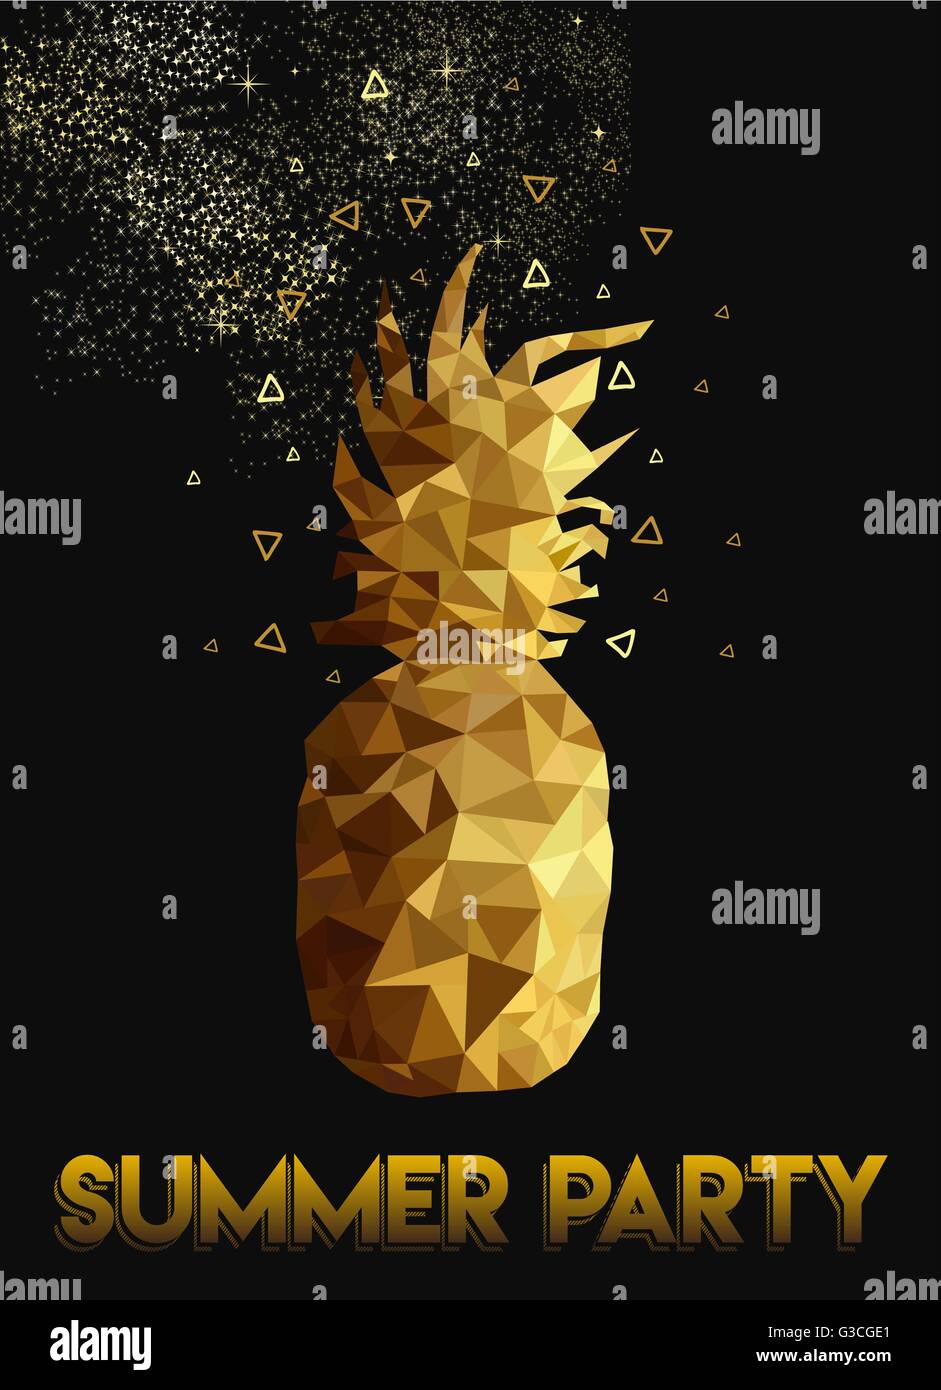 Retro summer party celebration design of pineapple in gold low poly style with night sky and stars background for invitation Stock Vector